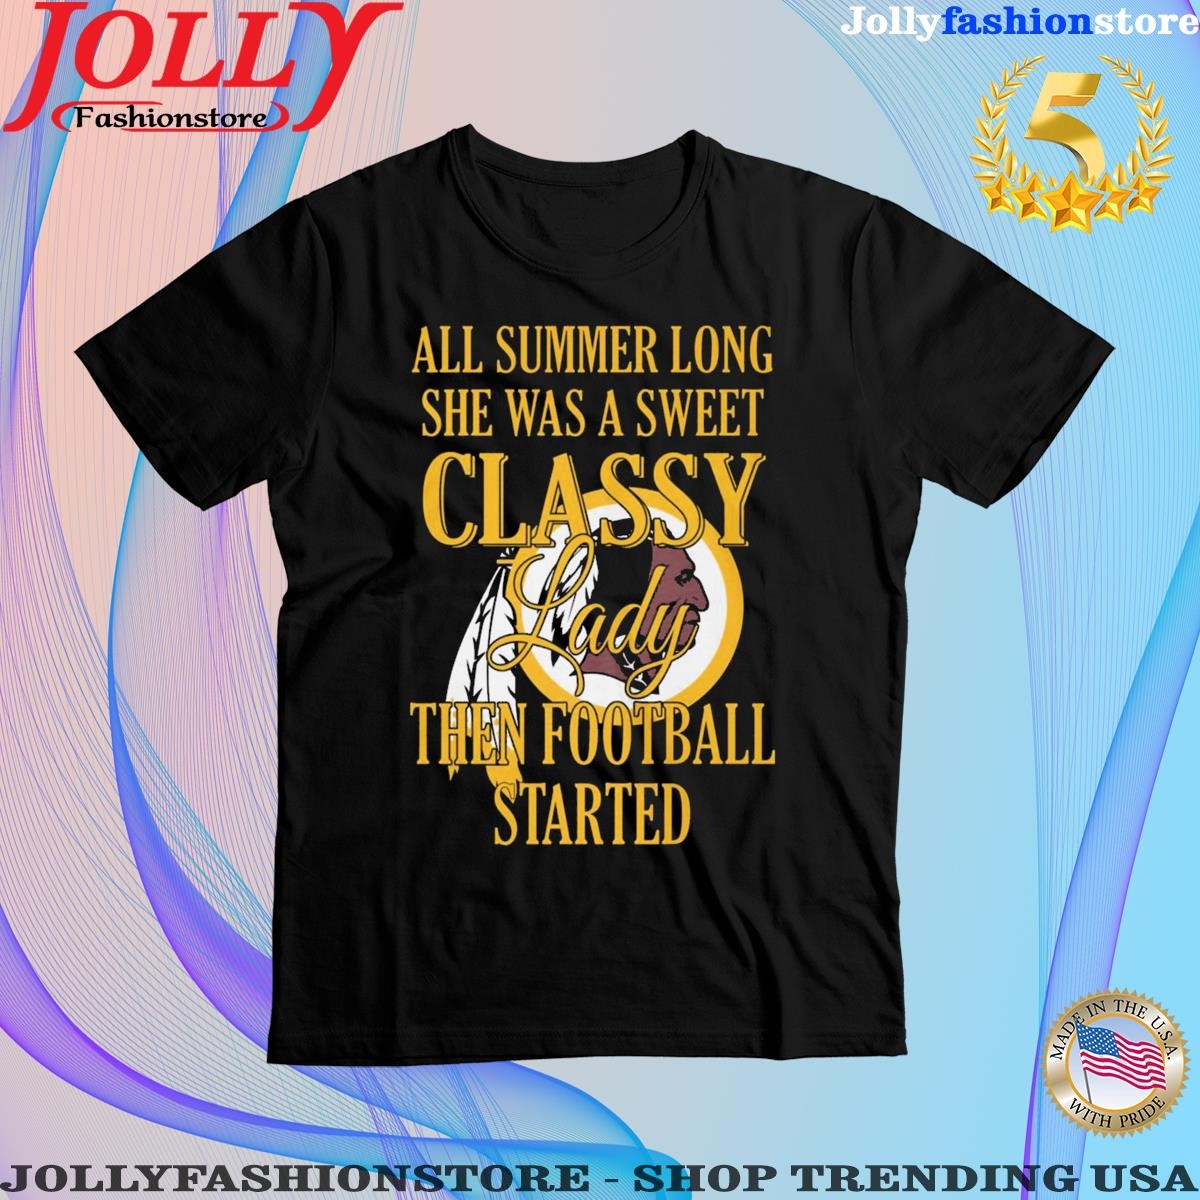 Washington Redskins all summer long she was a sweet classy lady then Football started T-shirt